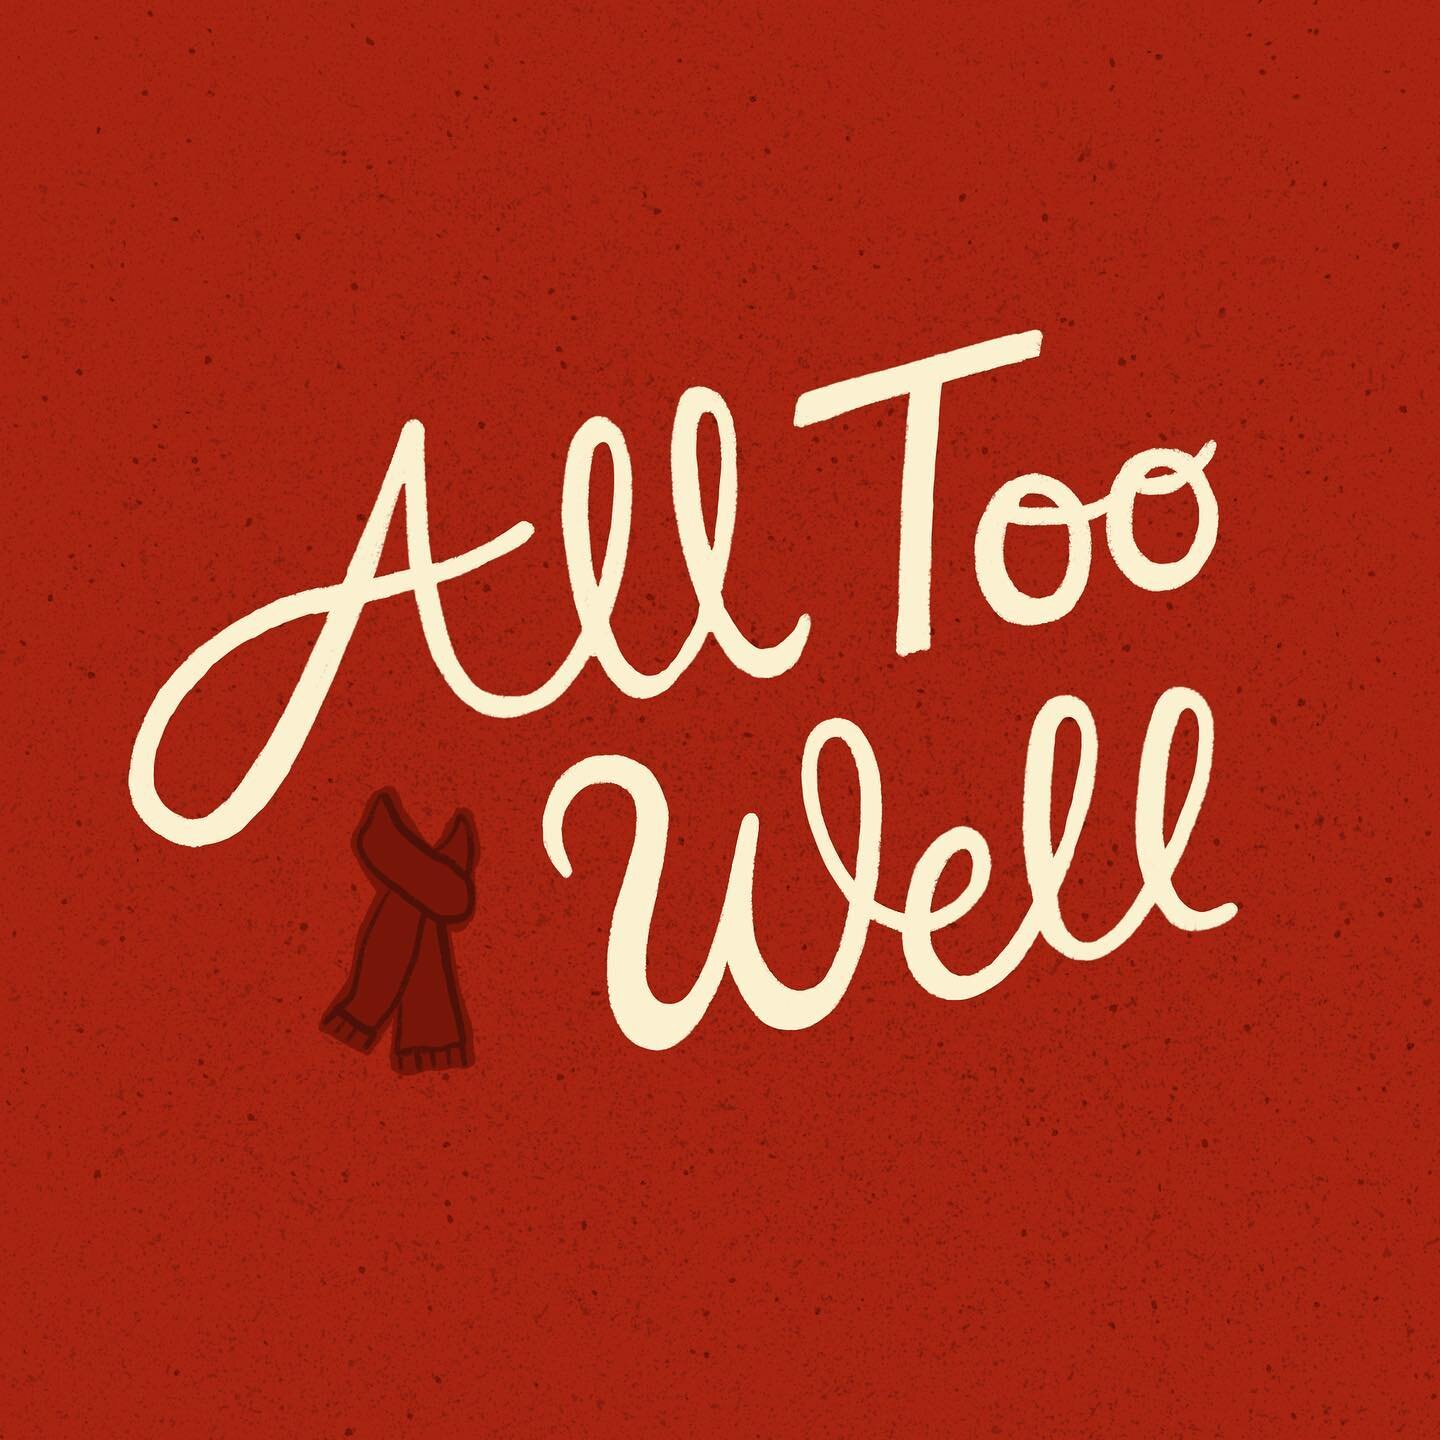 And you were tossing me the car keys&hellip;
&bull;
&bull;
&bull;
&bull;
&bull;
#taylorswift #alltoowell #taylorsversion #typography #graphicdesign #type #customtype #goodtype #worldoftype #typespire #designinspiration #typism #typedesign #showusyour